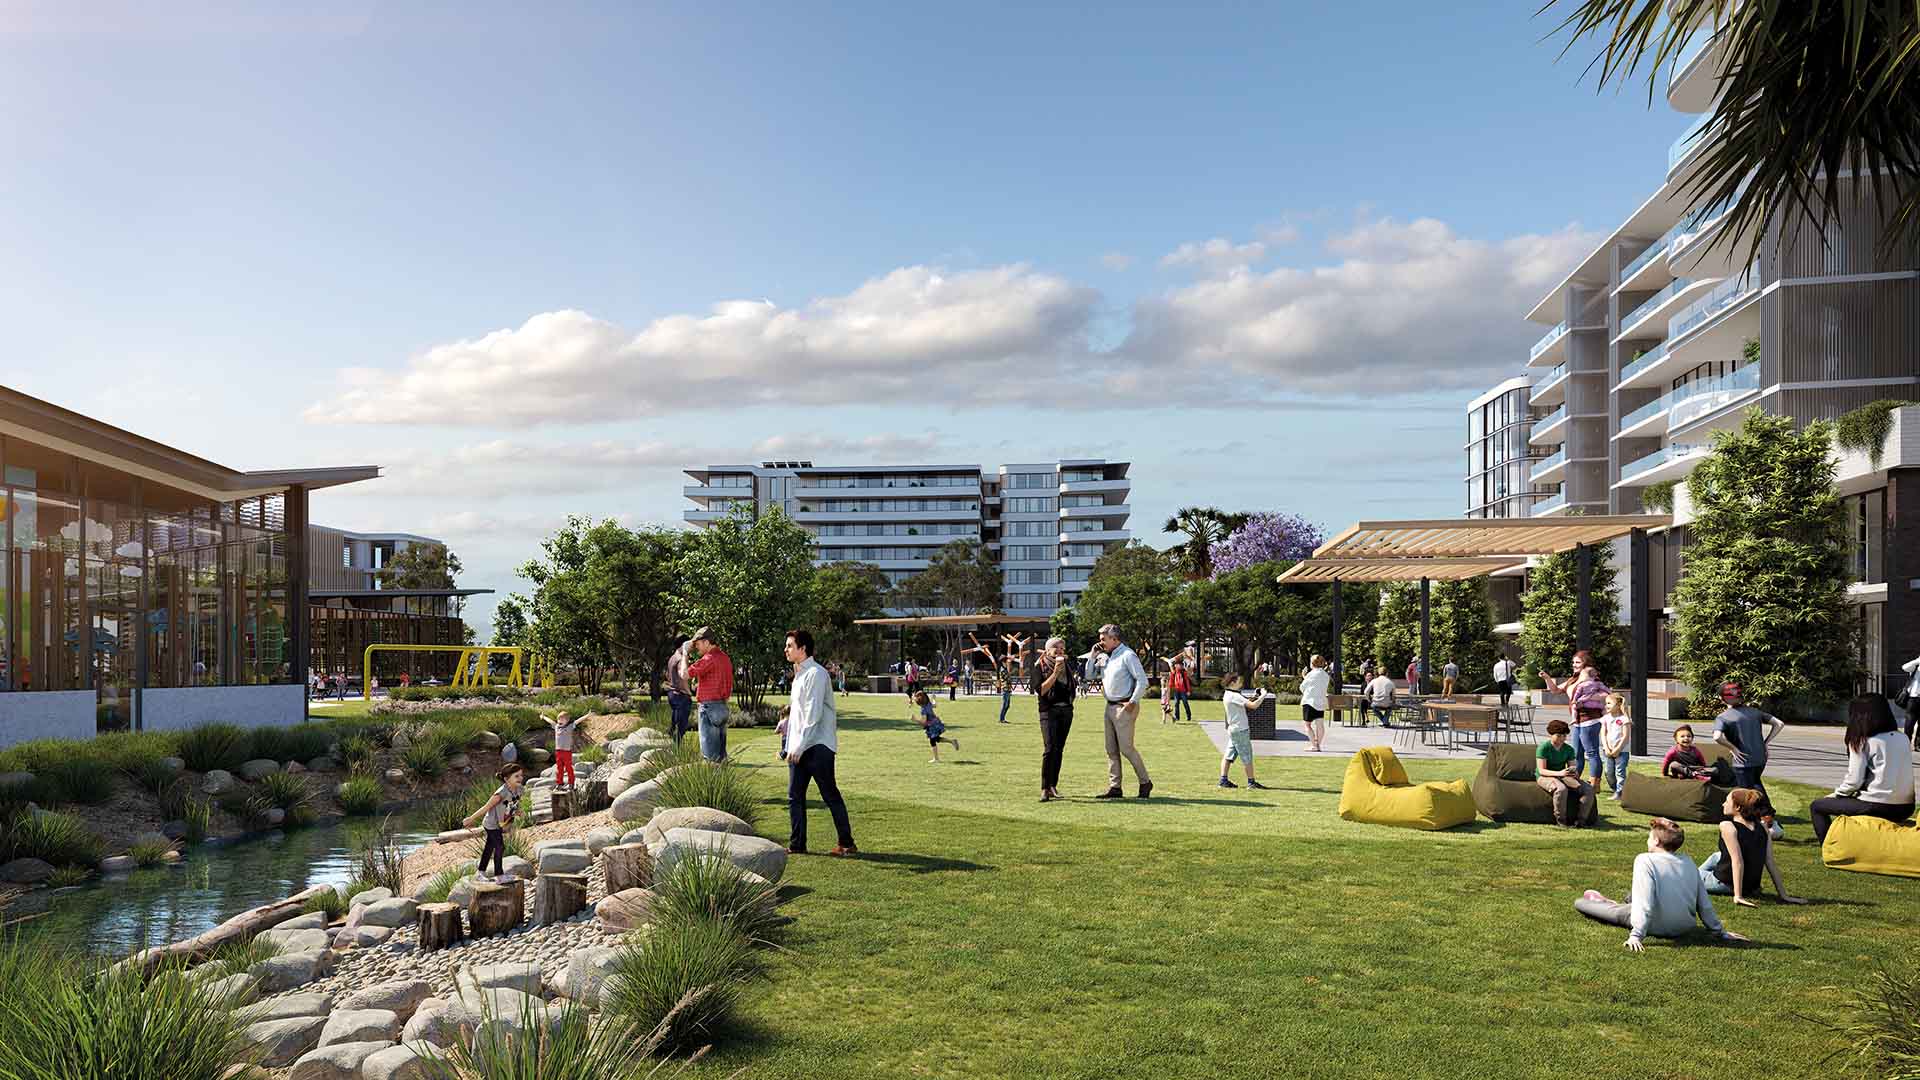 Artist's impression of the 'green heart' of the Health and Wellbeing Precinct development on Innovation Campus